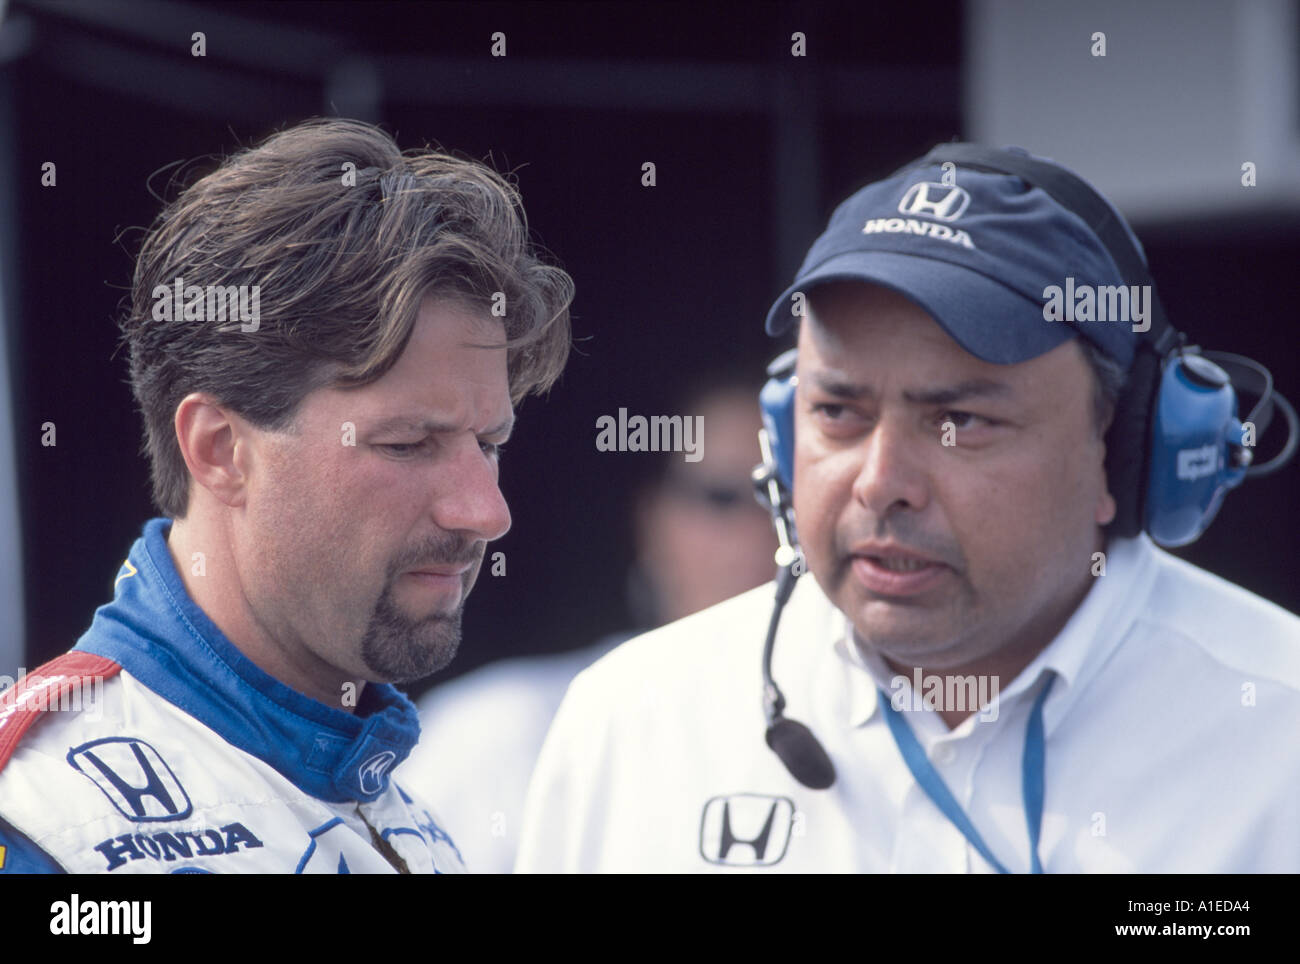 Michael Andretti with crewman at the 2001 Grand Prix of Cleveland Stock ...